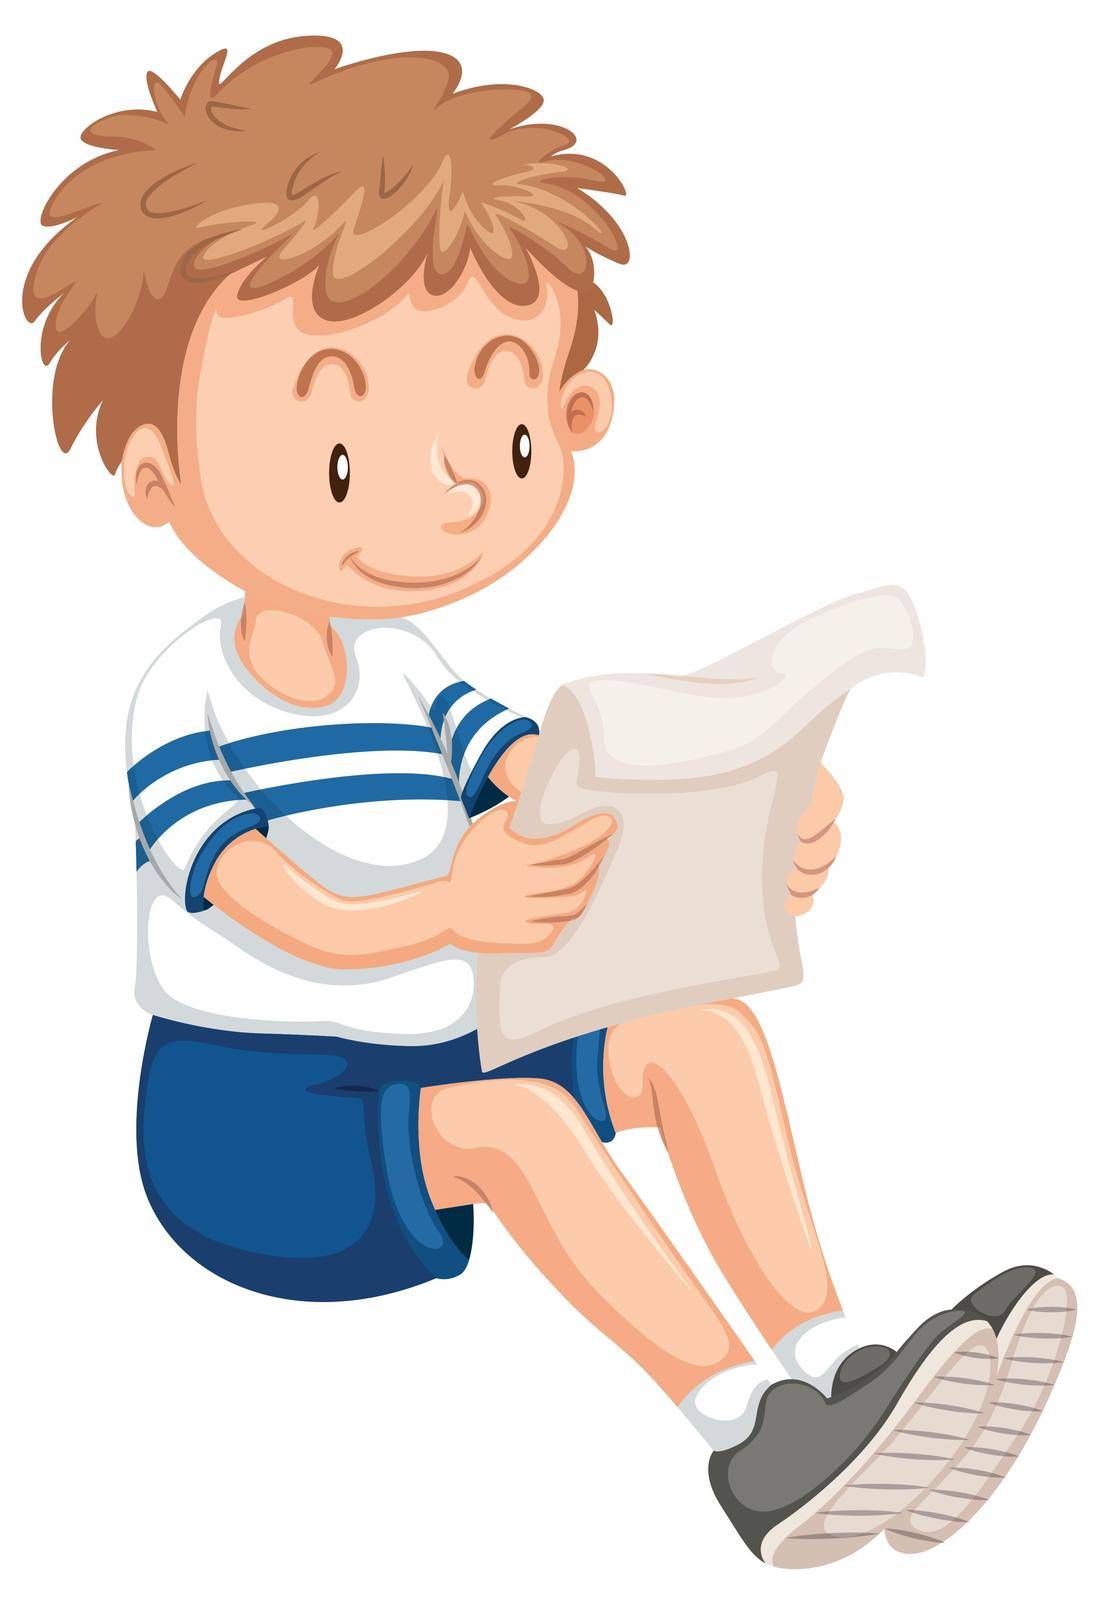 Boy reading from paper illustration